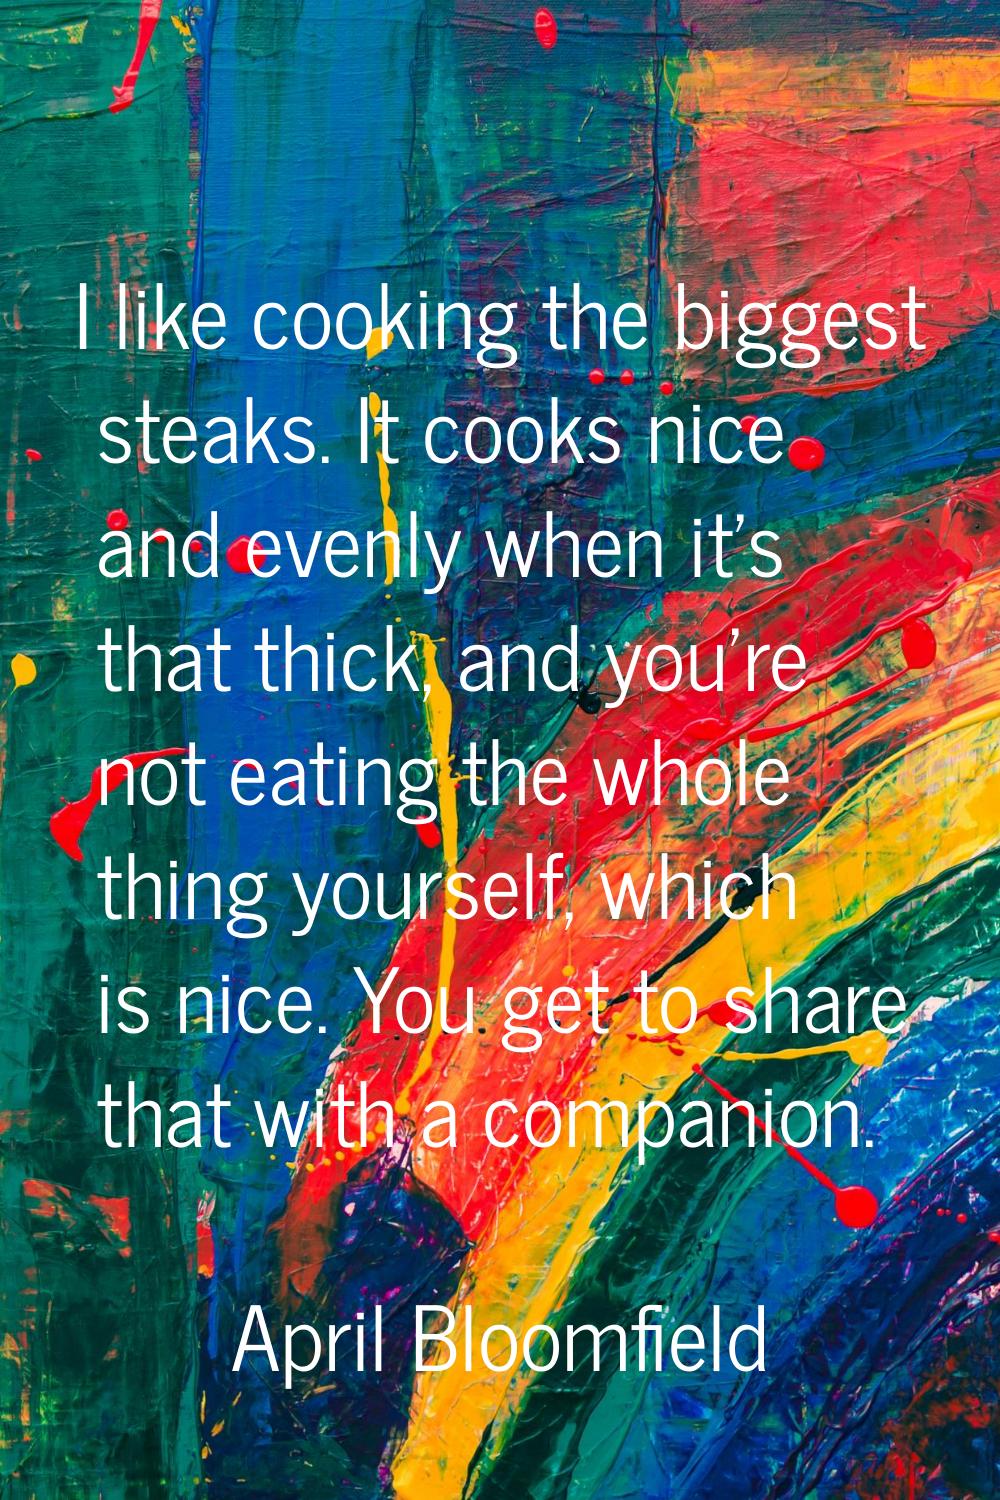 I like cooking the biggest steaks. It cooks nice and evenly when it's that thick, and you're not ea